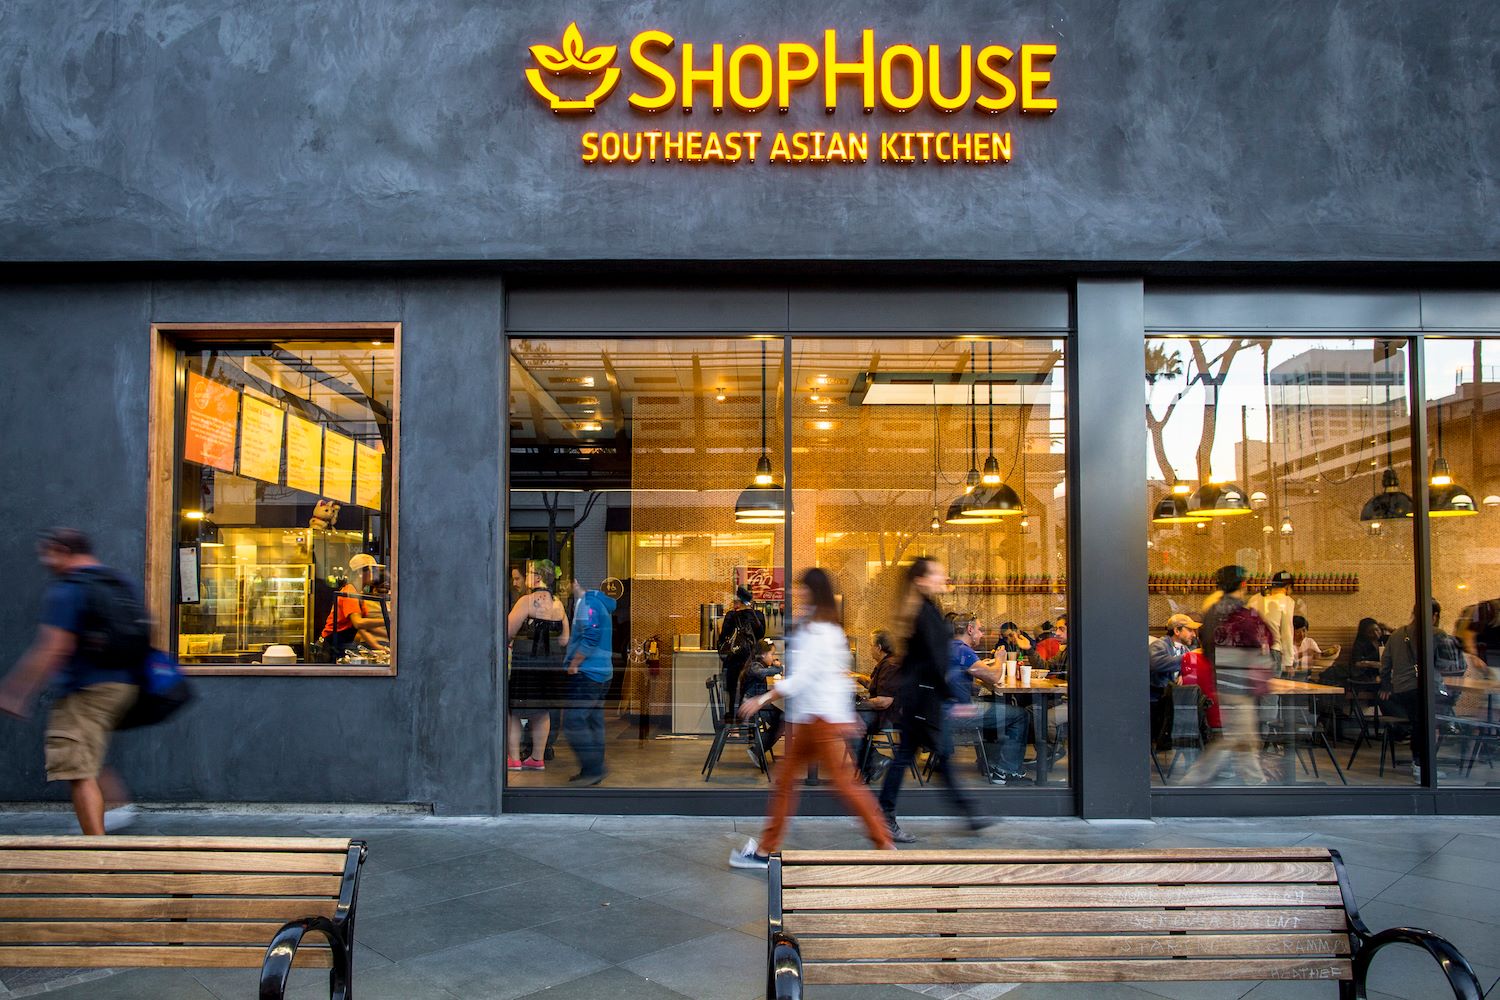 PHOTO: ShopHouse Southeast Asian Kitchen is seen here in this photo posted to their Facebook page.